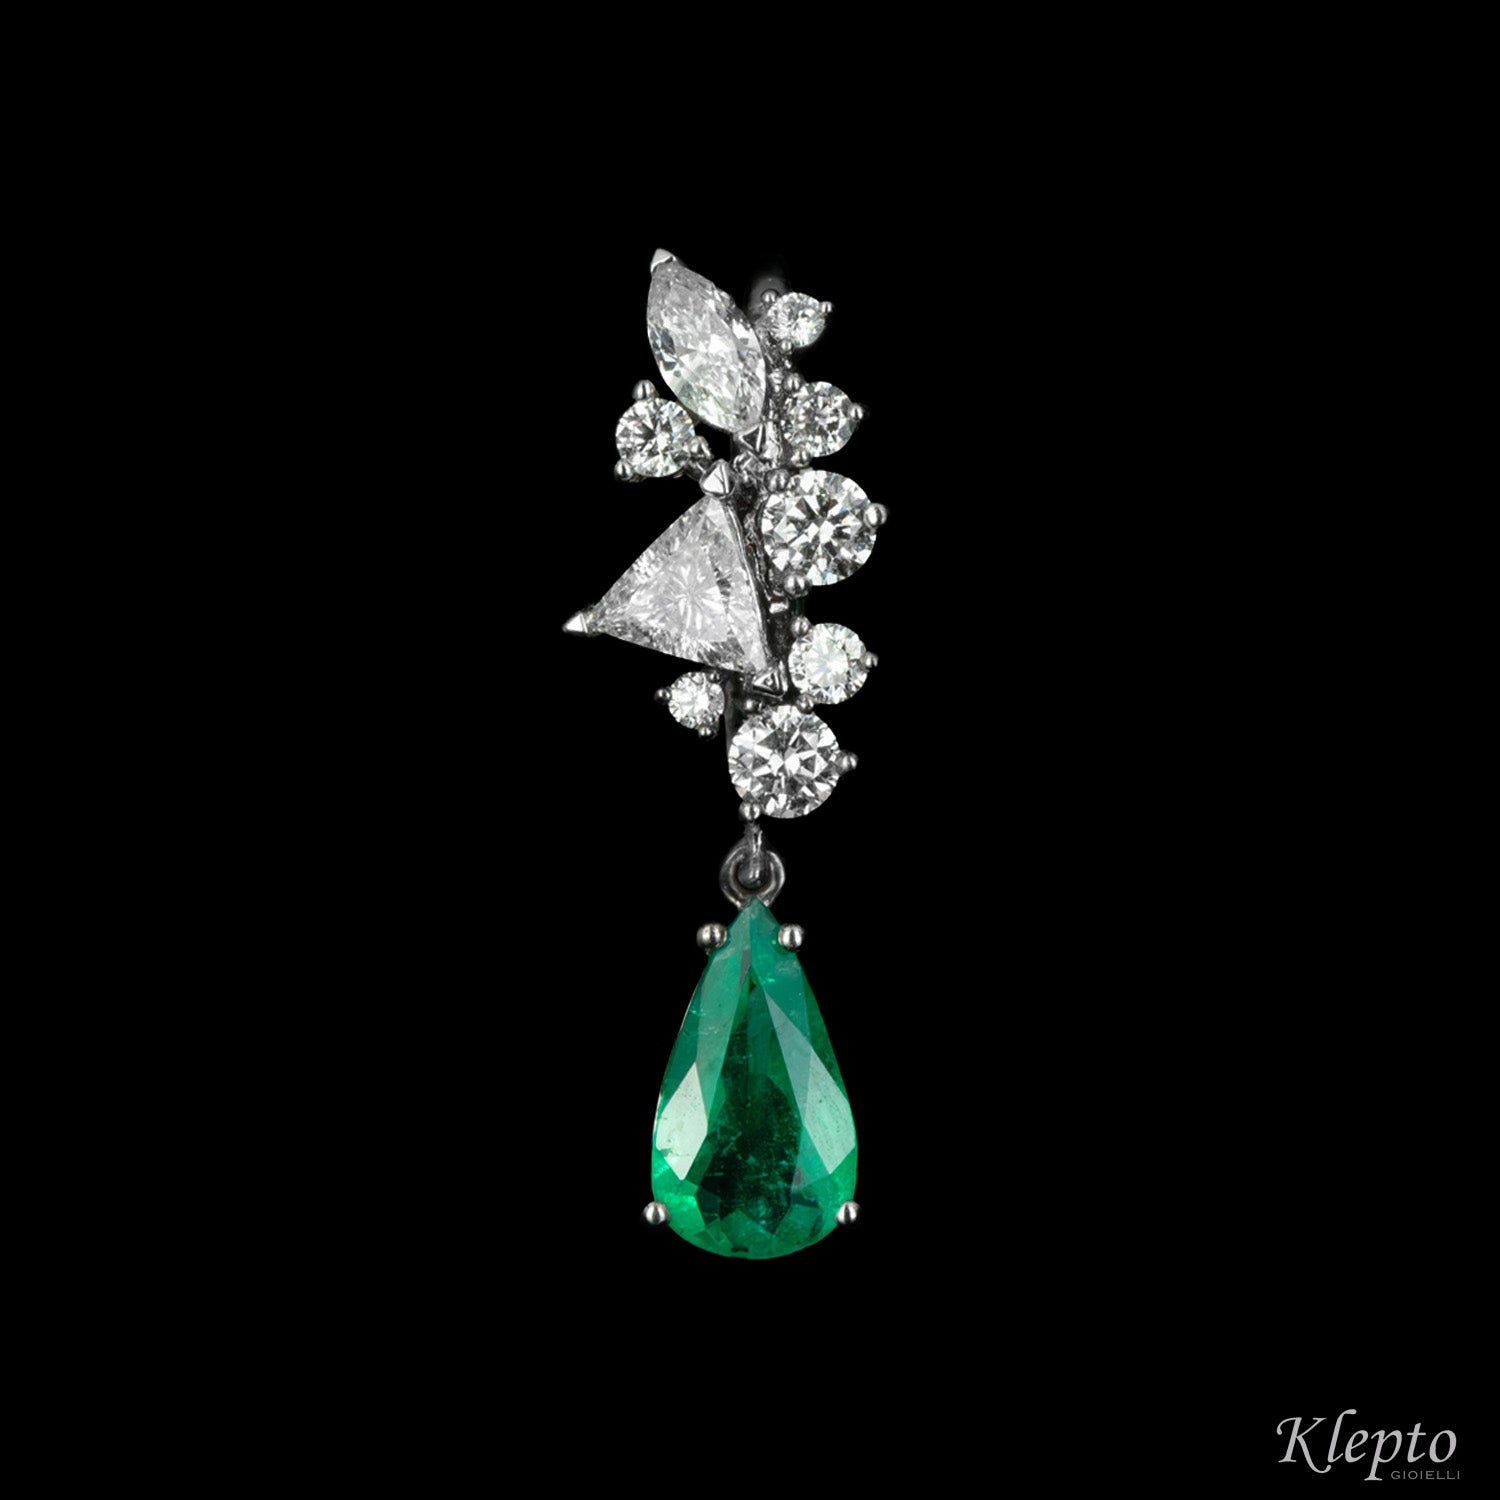 White gold earrings with emeralds and diamonds